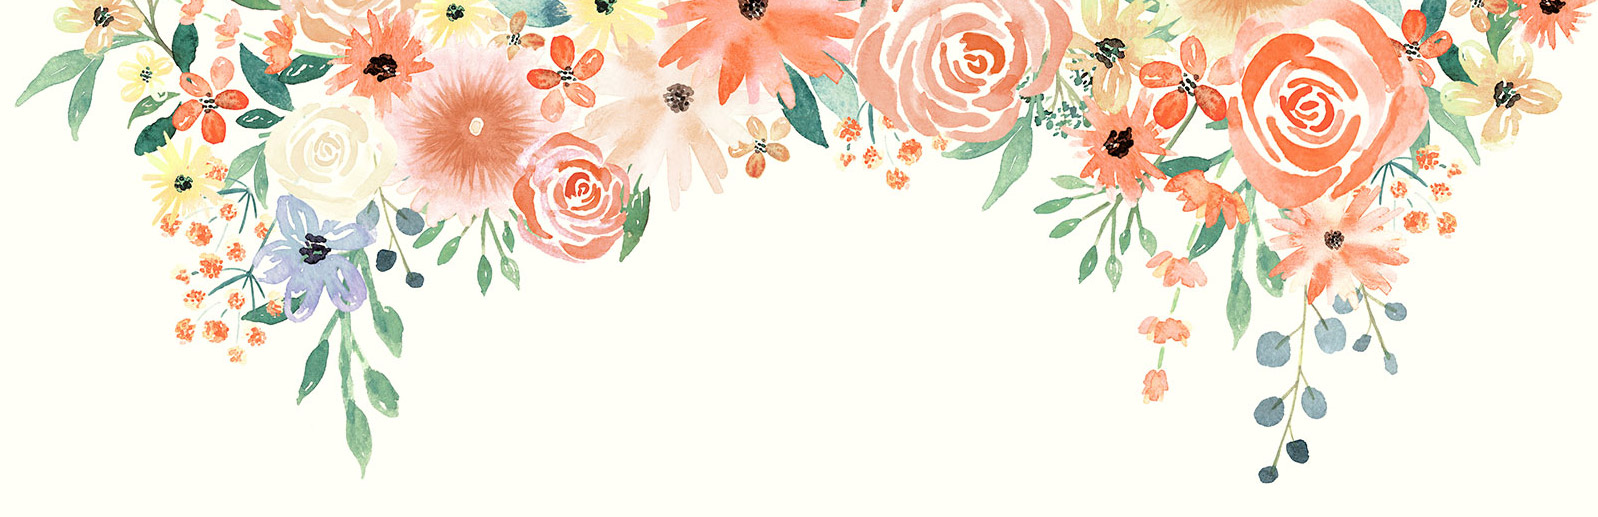 Watercolor Florals for graphic design